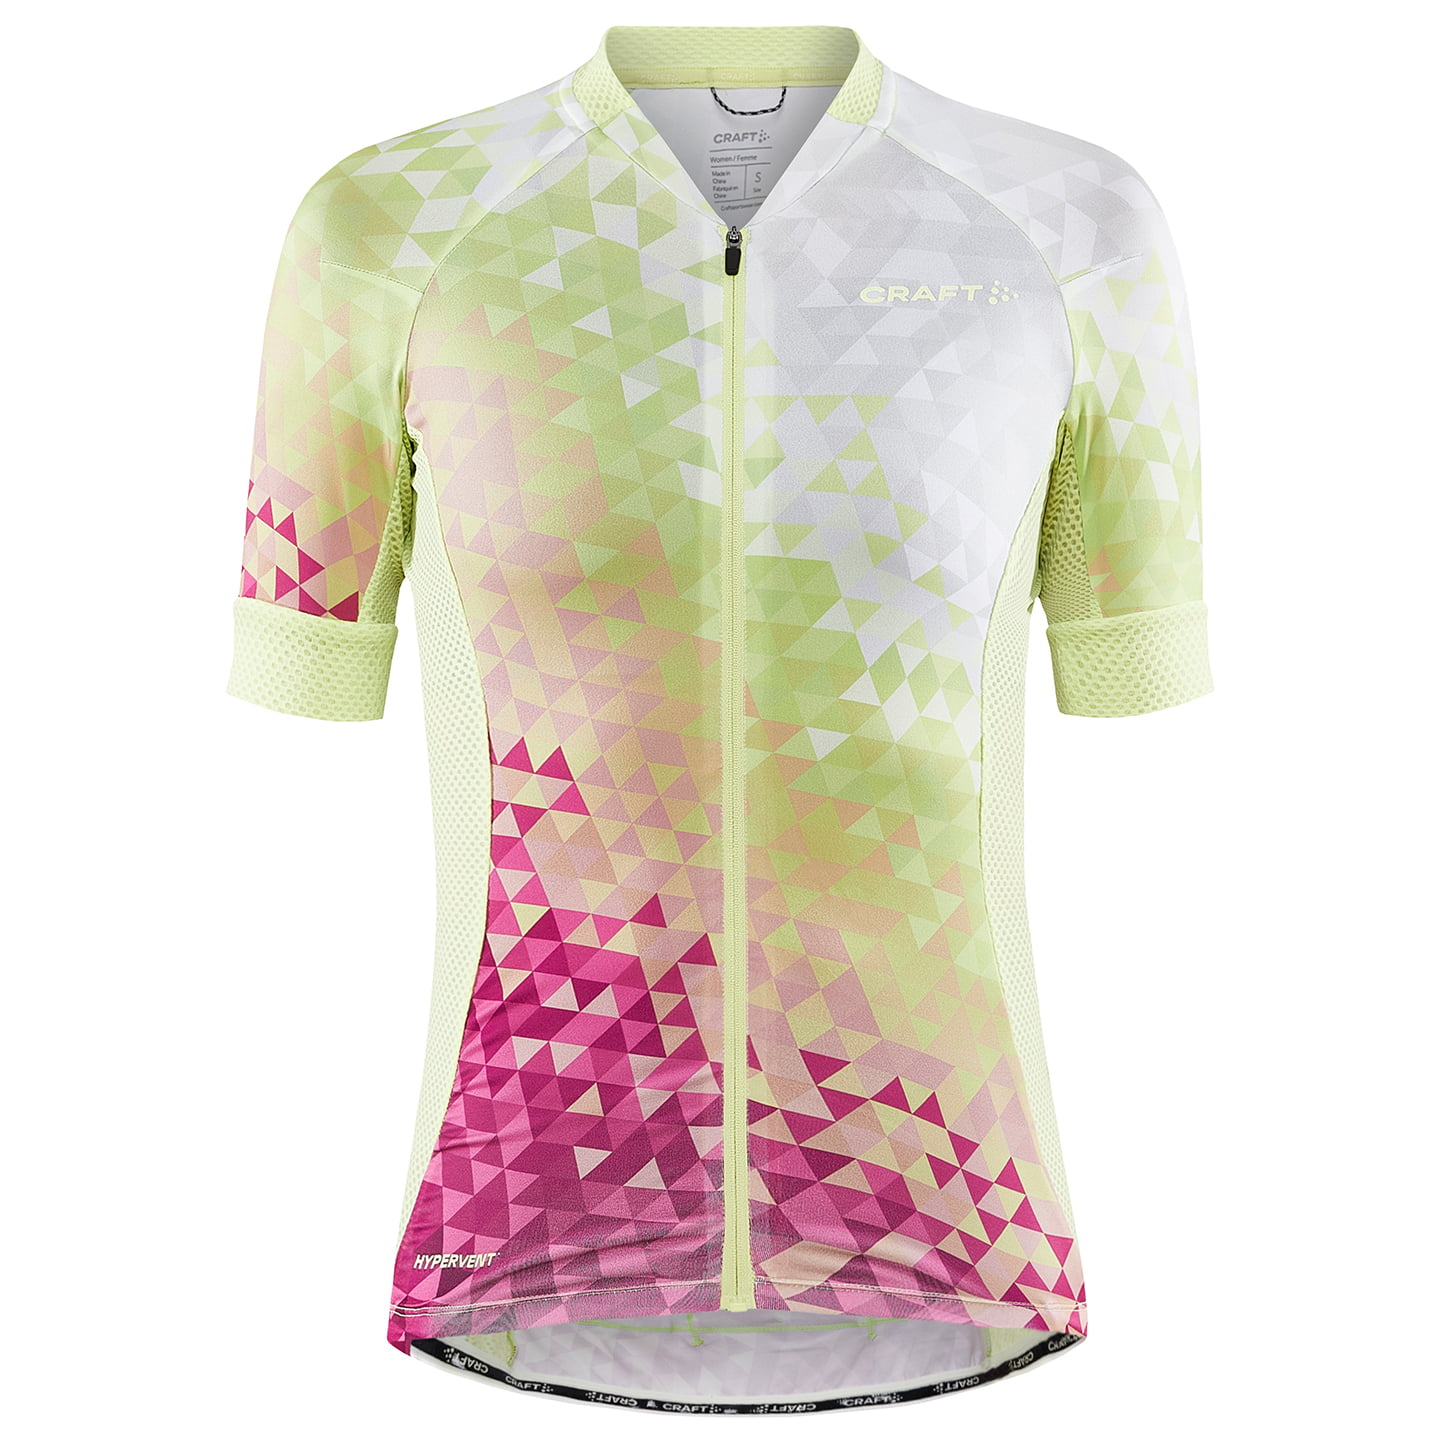 CRAFT ADV Endur Graphic Women’s Jersey Women’s Short Sleeve Jersey, size S, Cycling jersey, Cycle gear